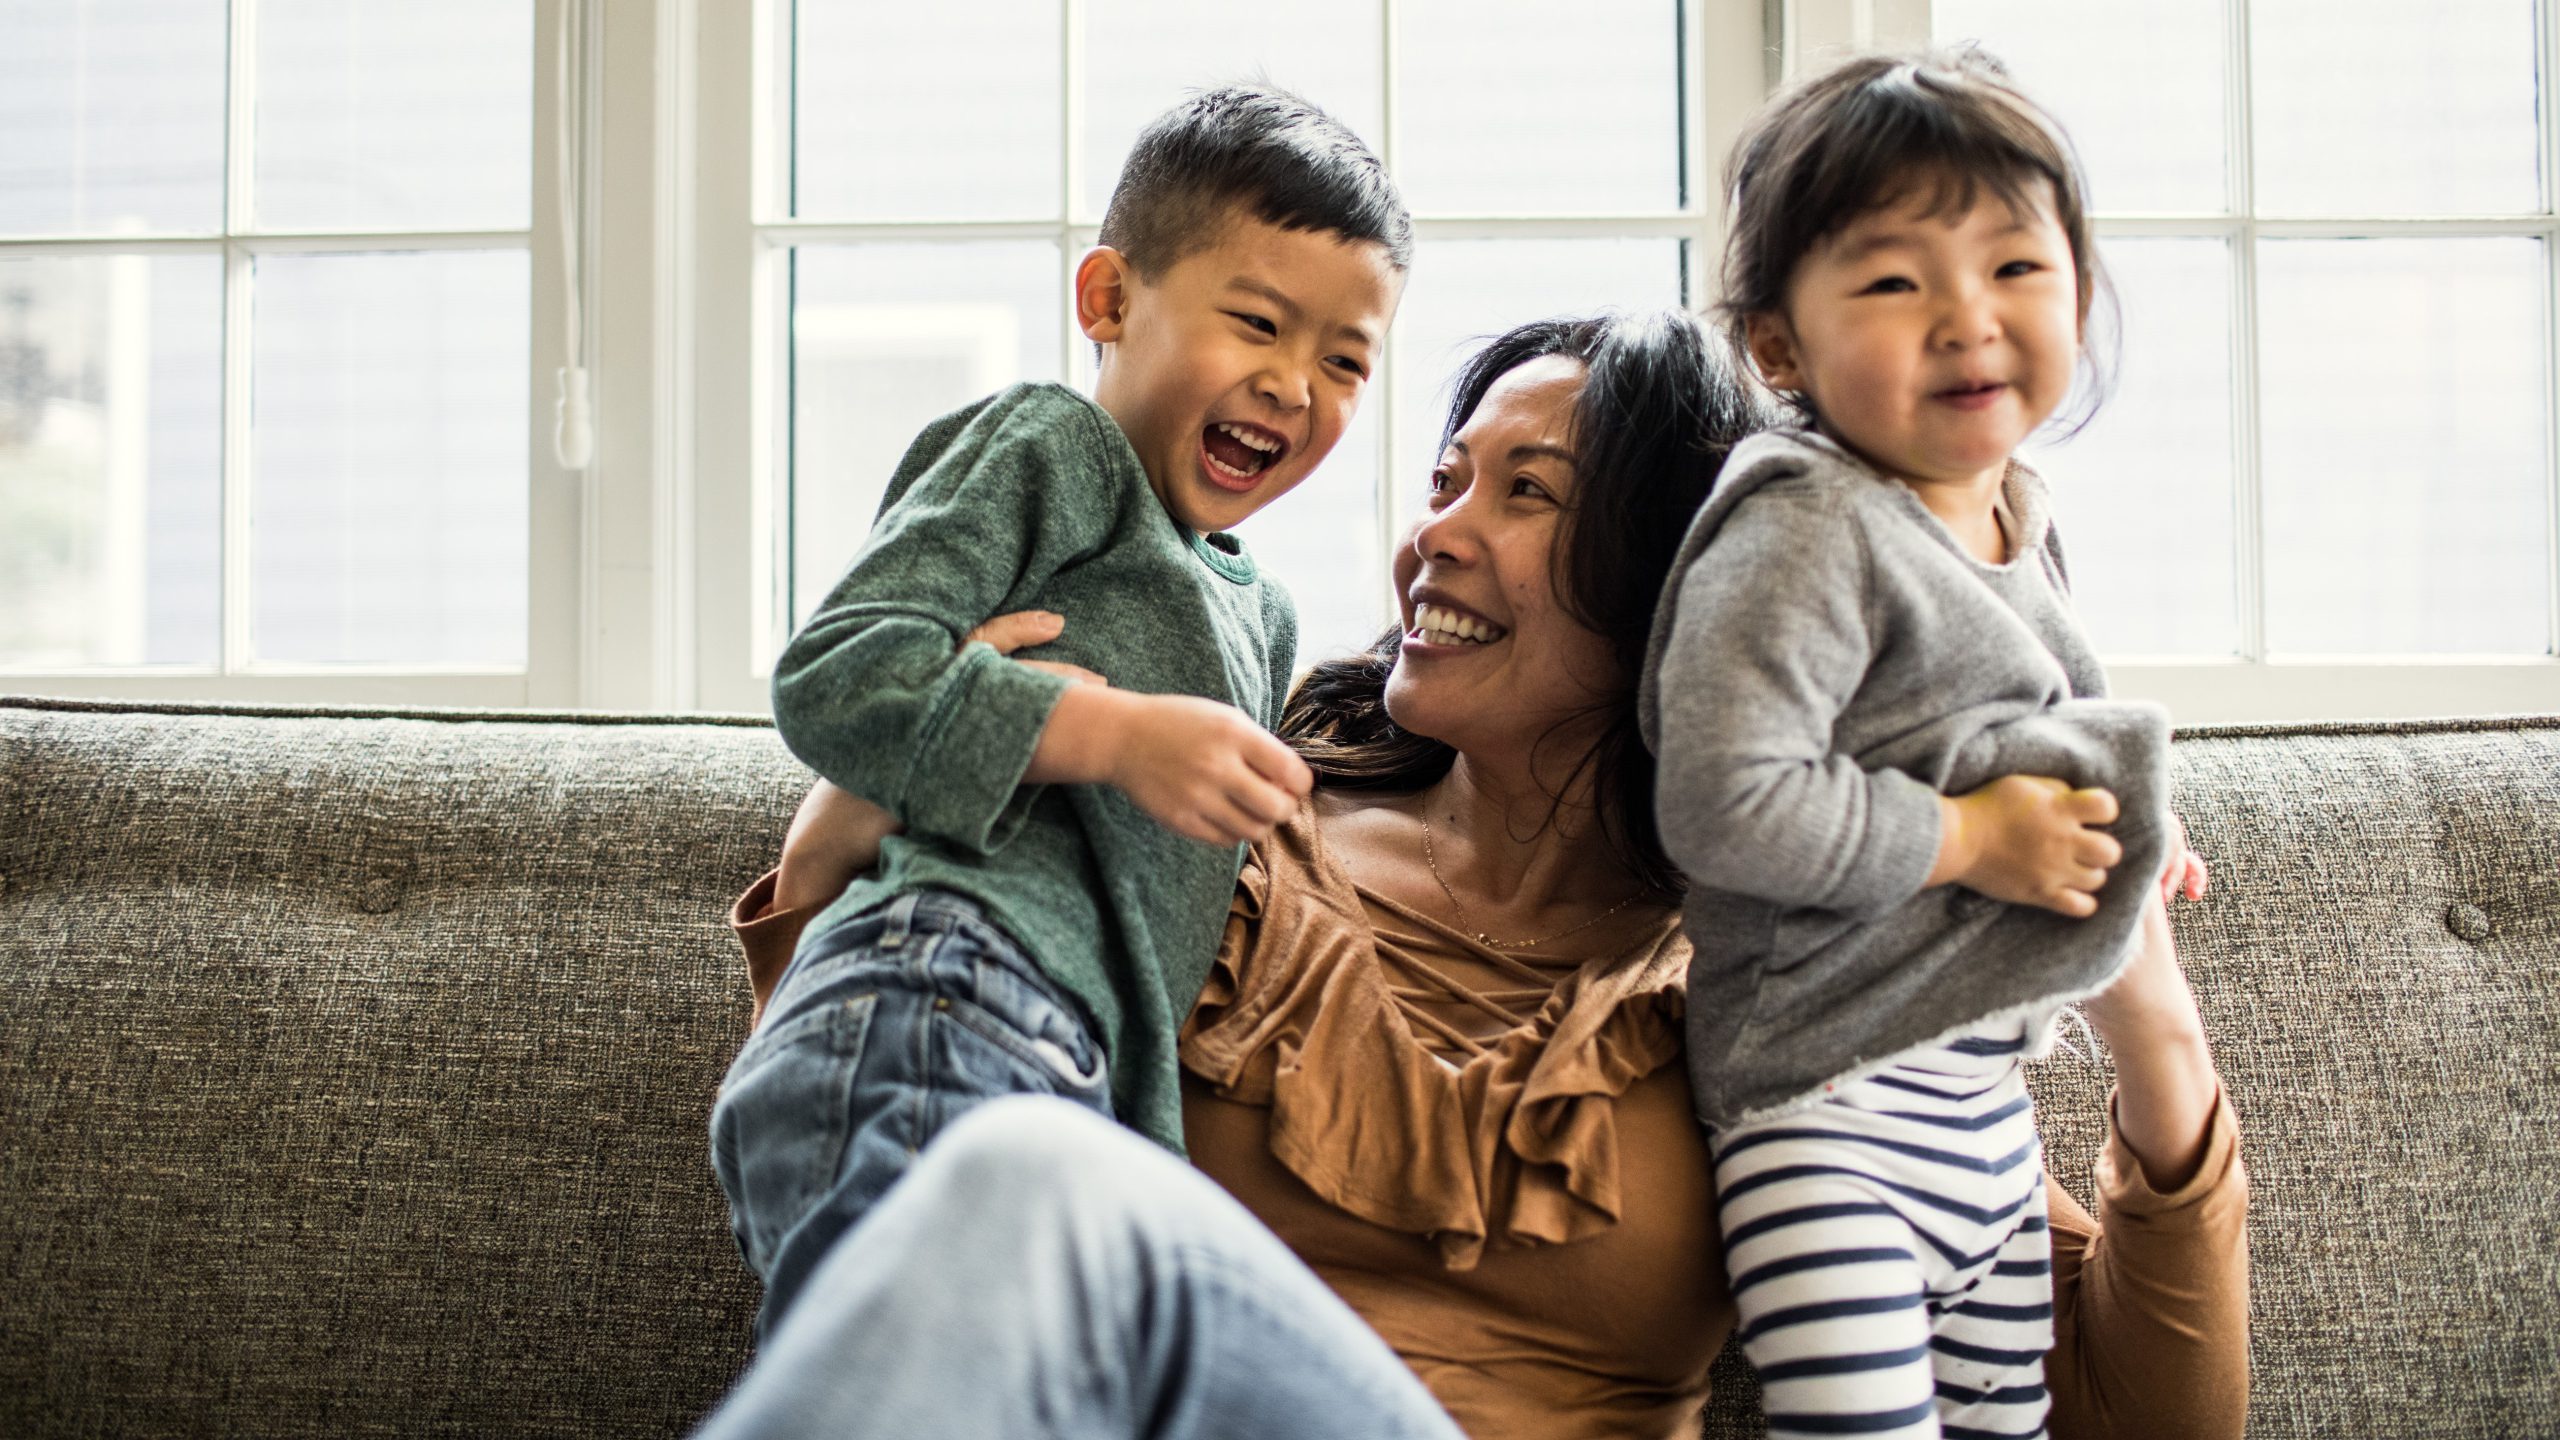 An image of a woman on a couch with two children